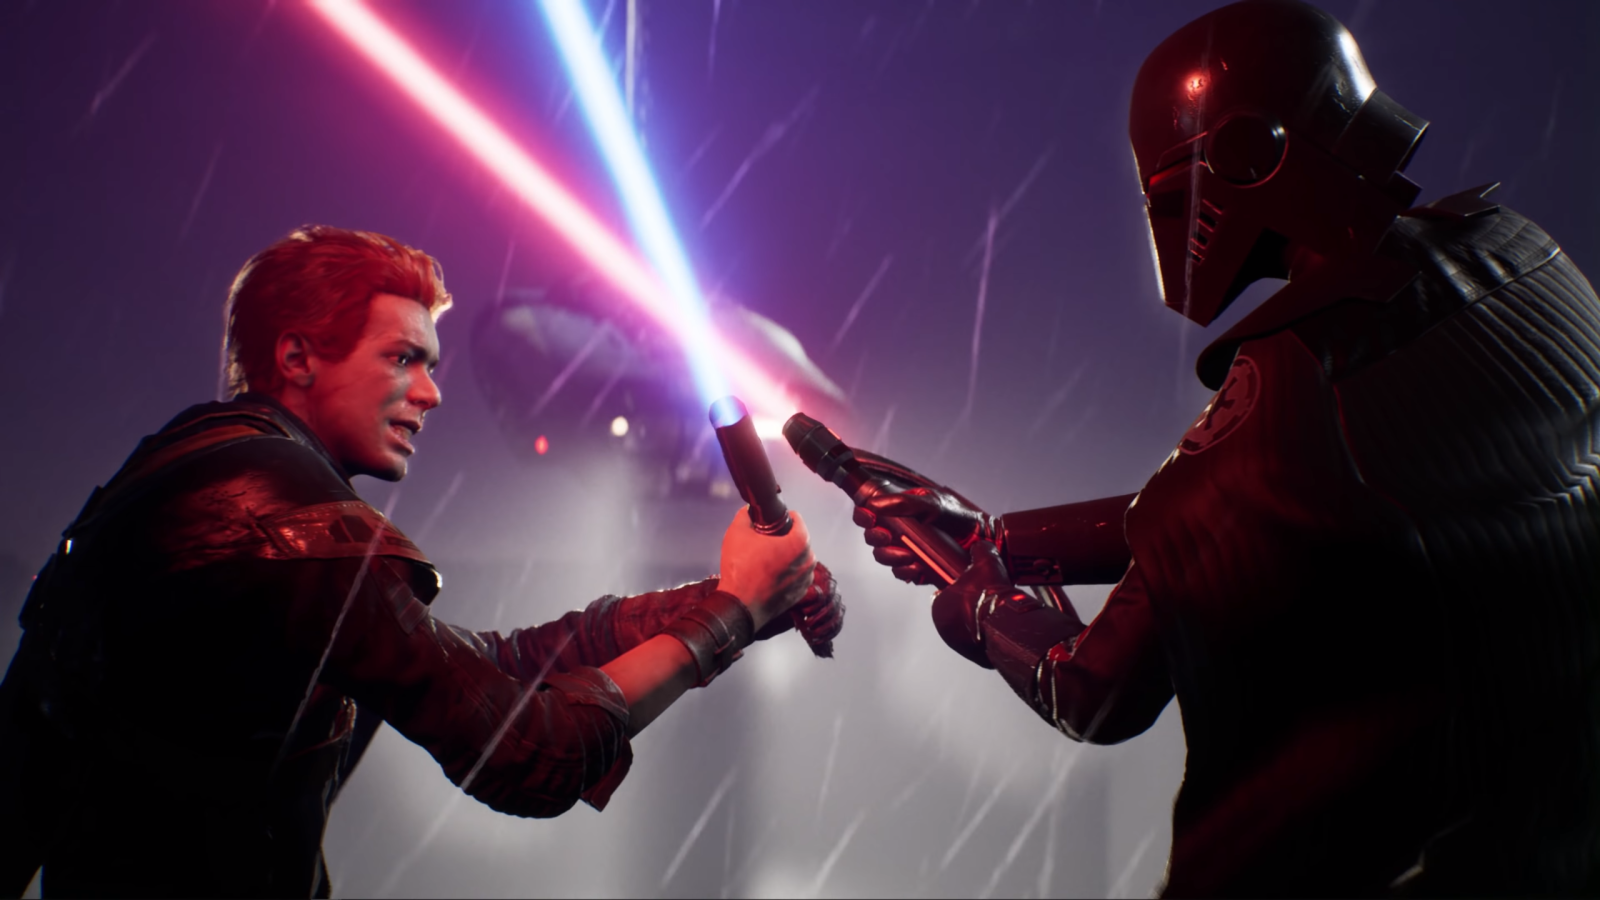 Star Wars Jedi: Fallen Order Game For Gaming PC